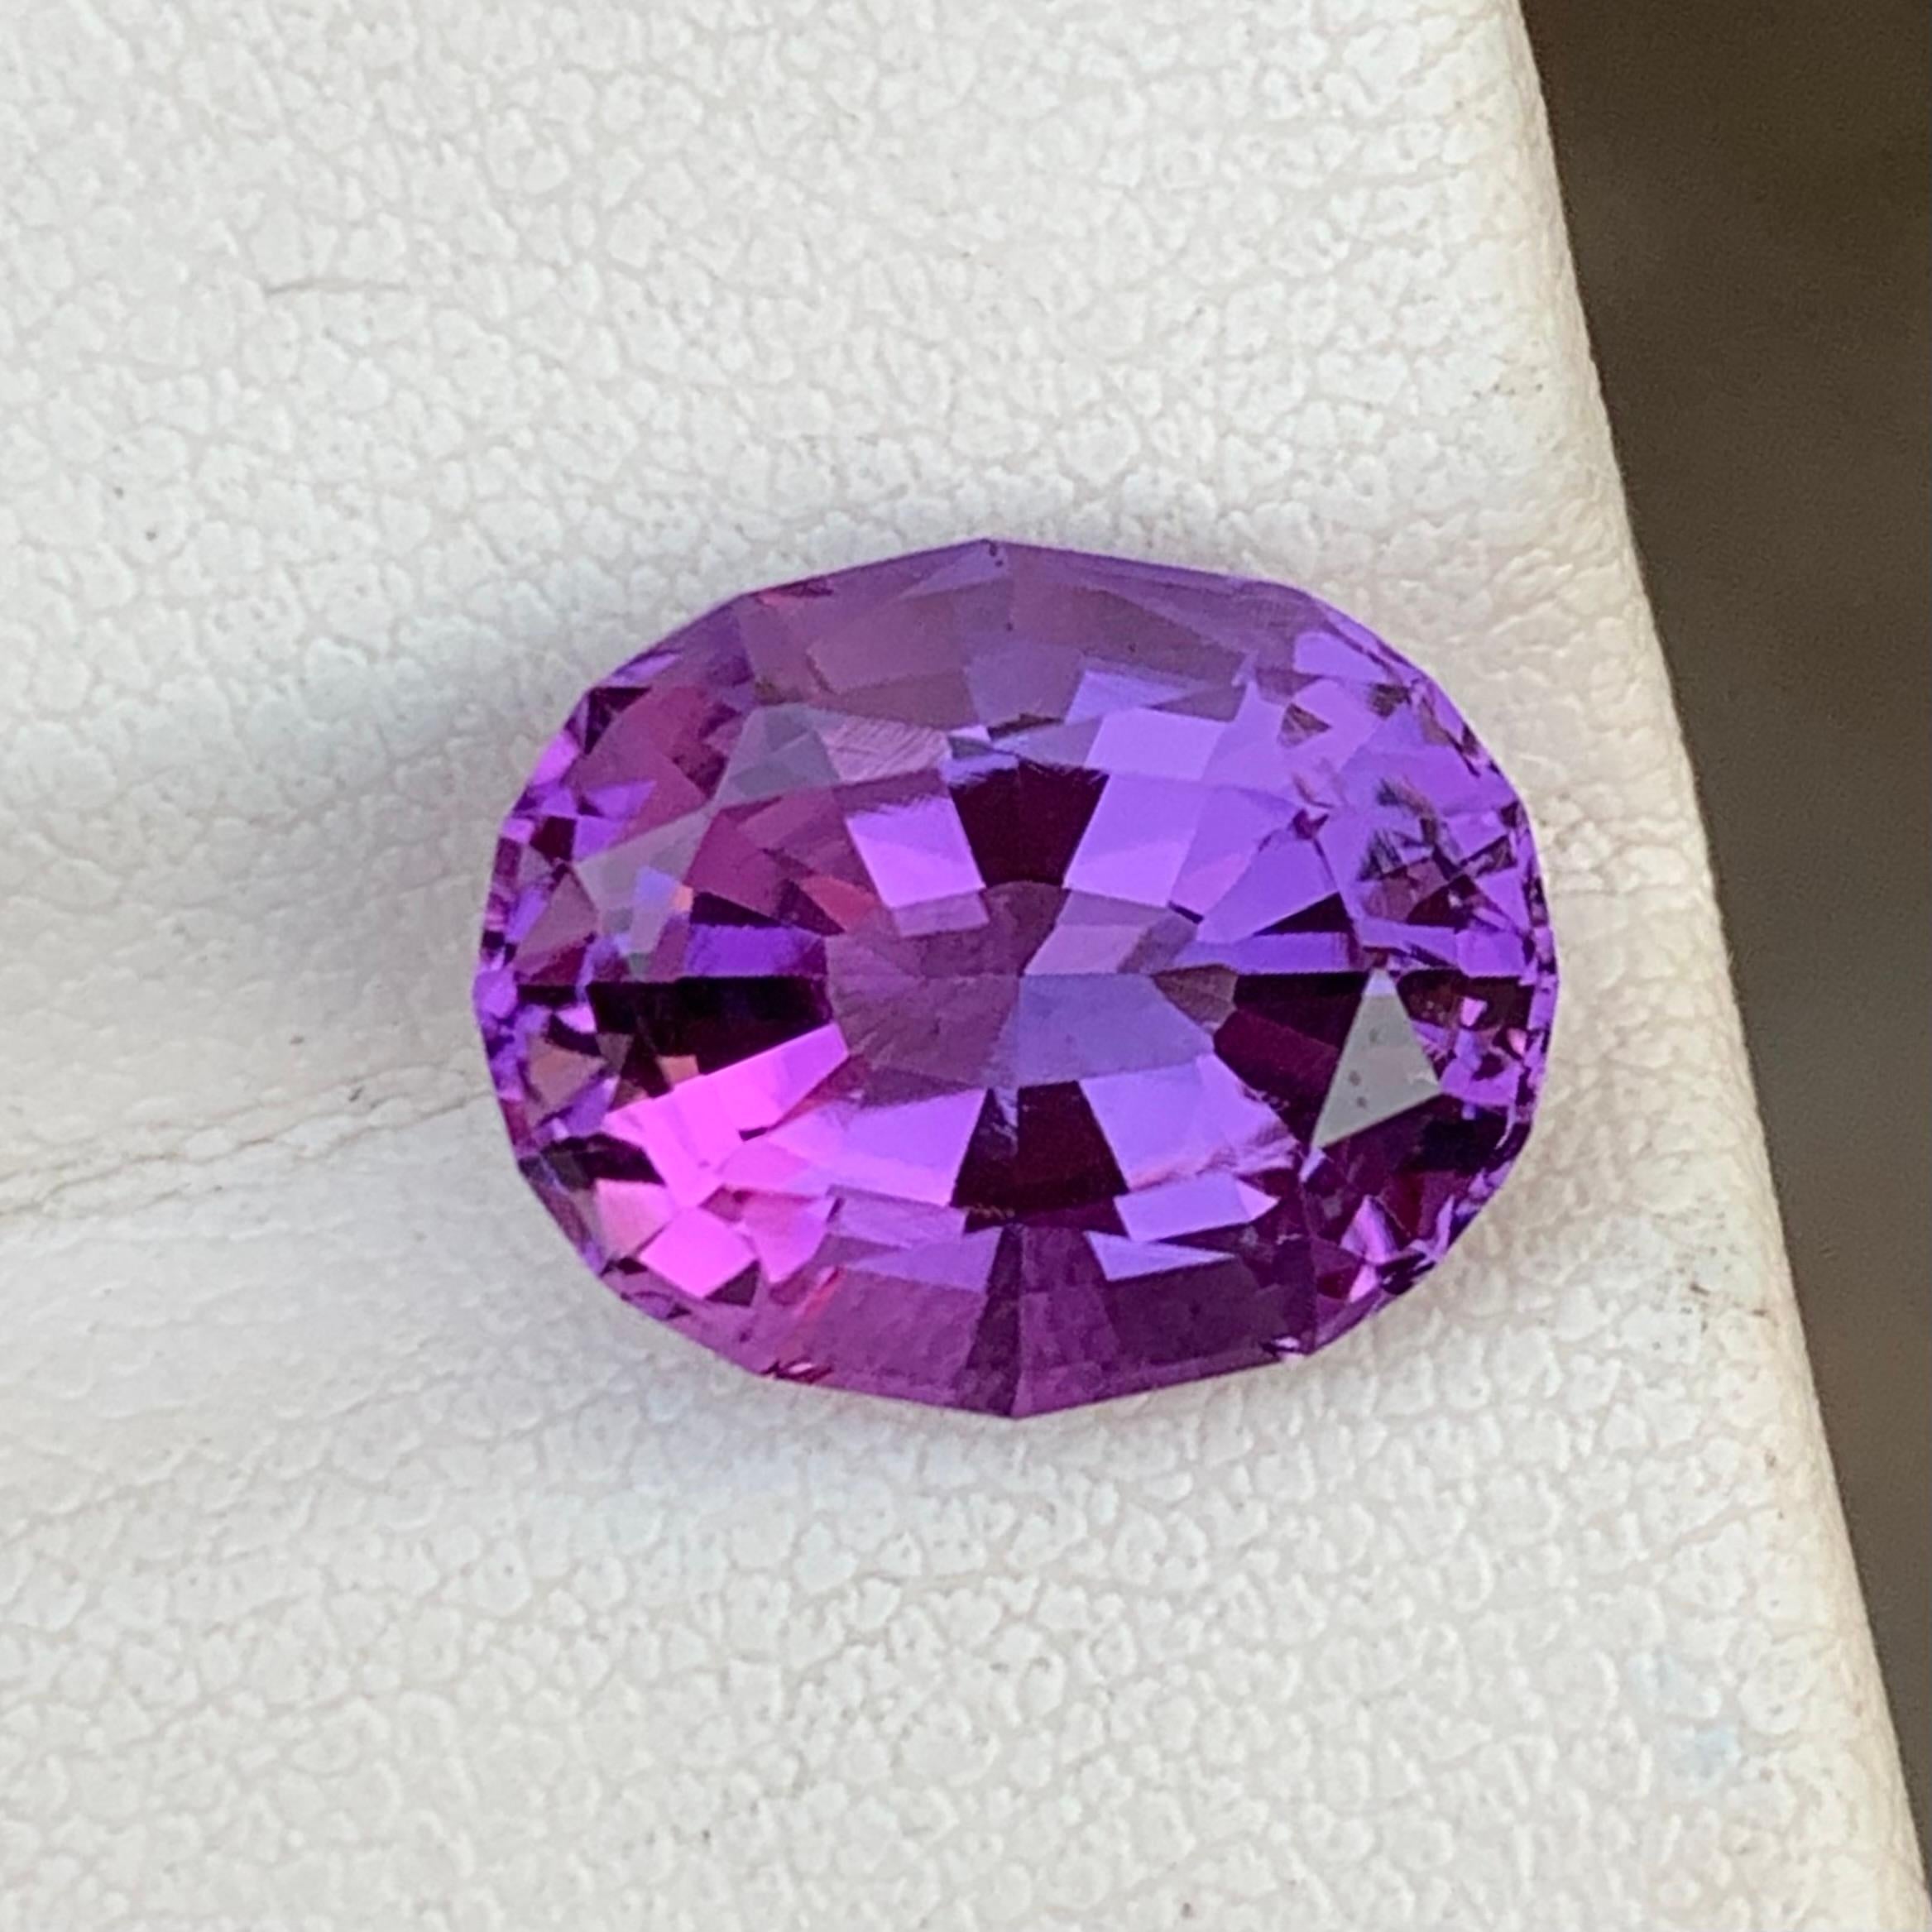 Loose Amethyst 
Weight: 4.60 Carats 
Dimension: 12x9.7x7.2 Mm
Origin: Brazil
Shape: Oval
Color: Purple
Treatment: Non
Certificate: On Client Demand 
Amethyst, a captivating purple variety of quartz, has captivated civilizations for centuries with